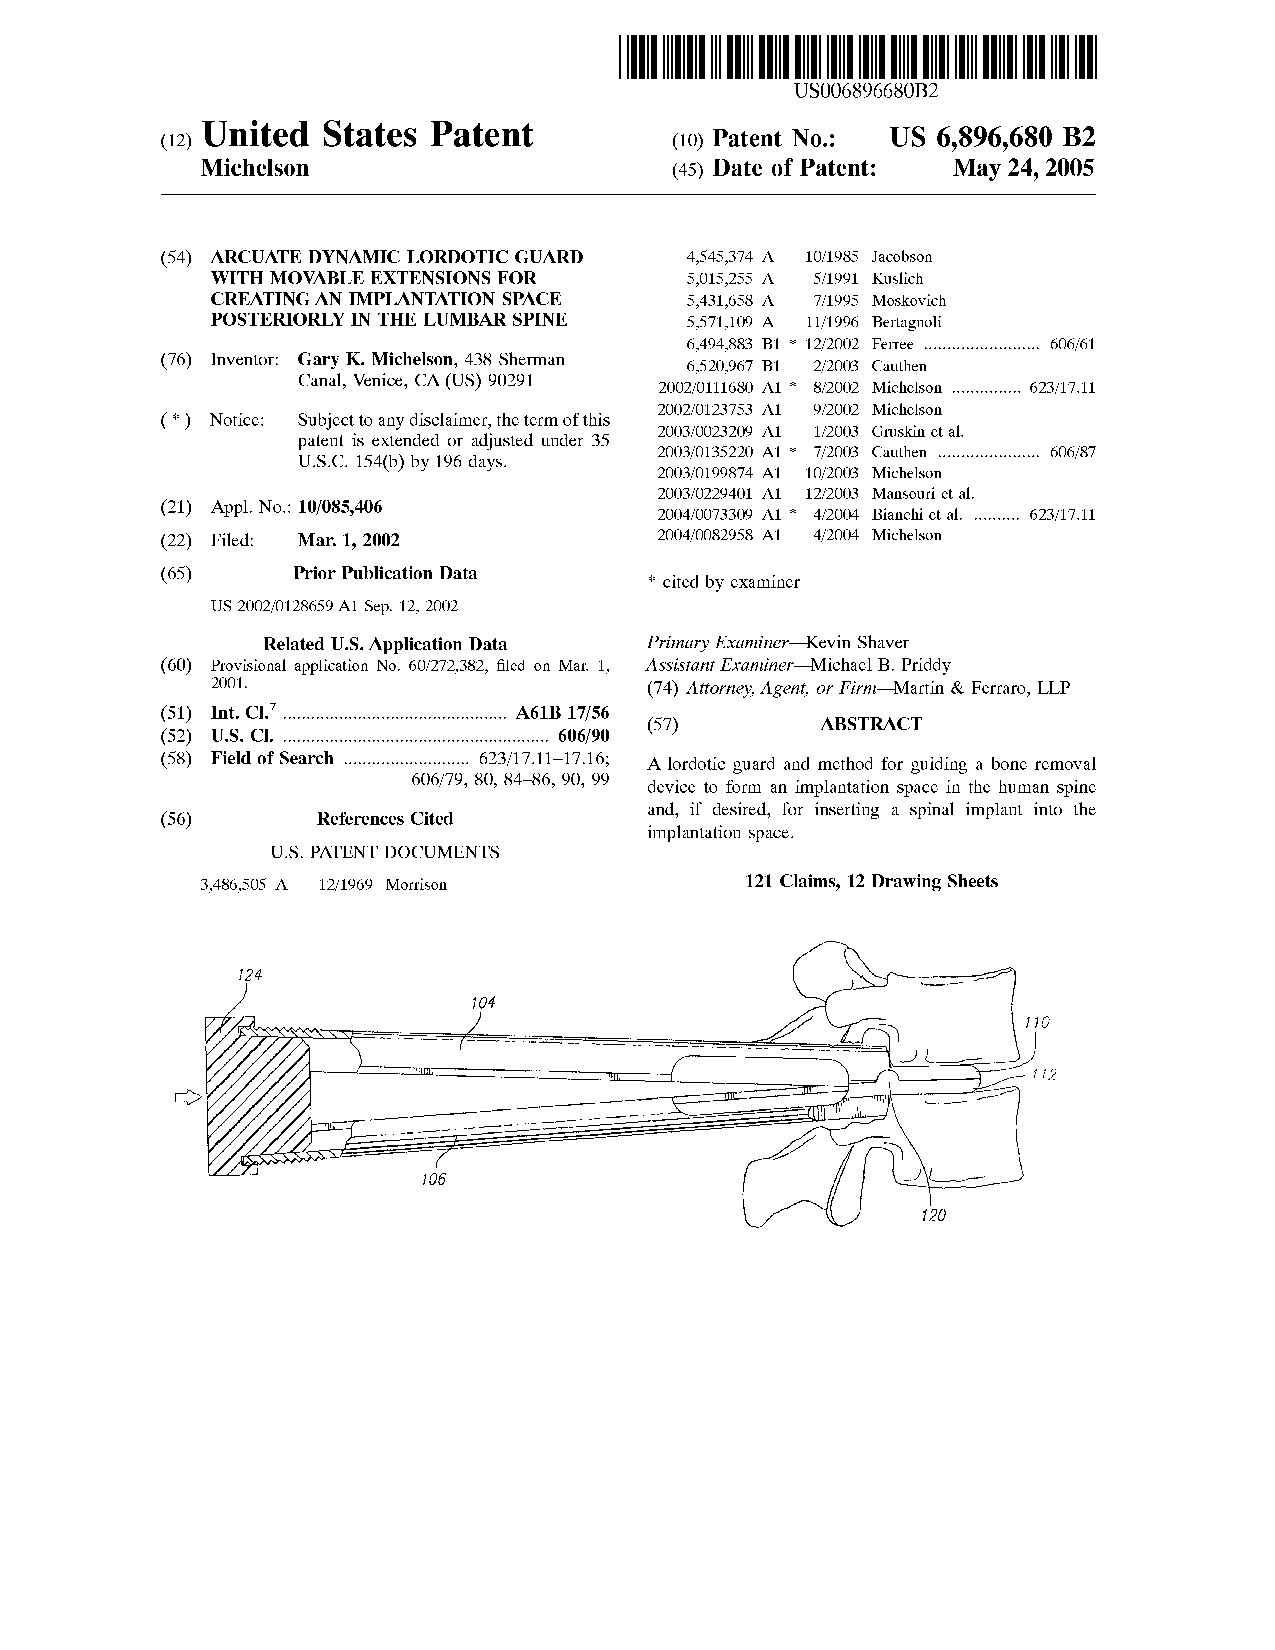 Arcuate dynamic lordotic guard with movable extensions for creating an     implantation space posteriorly in the lumbar spine - Patent 6,896,680